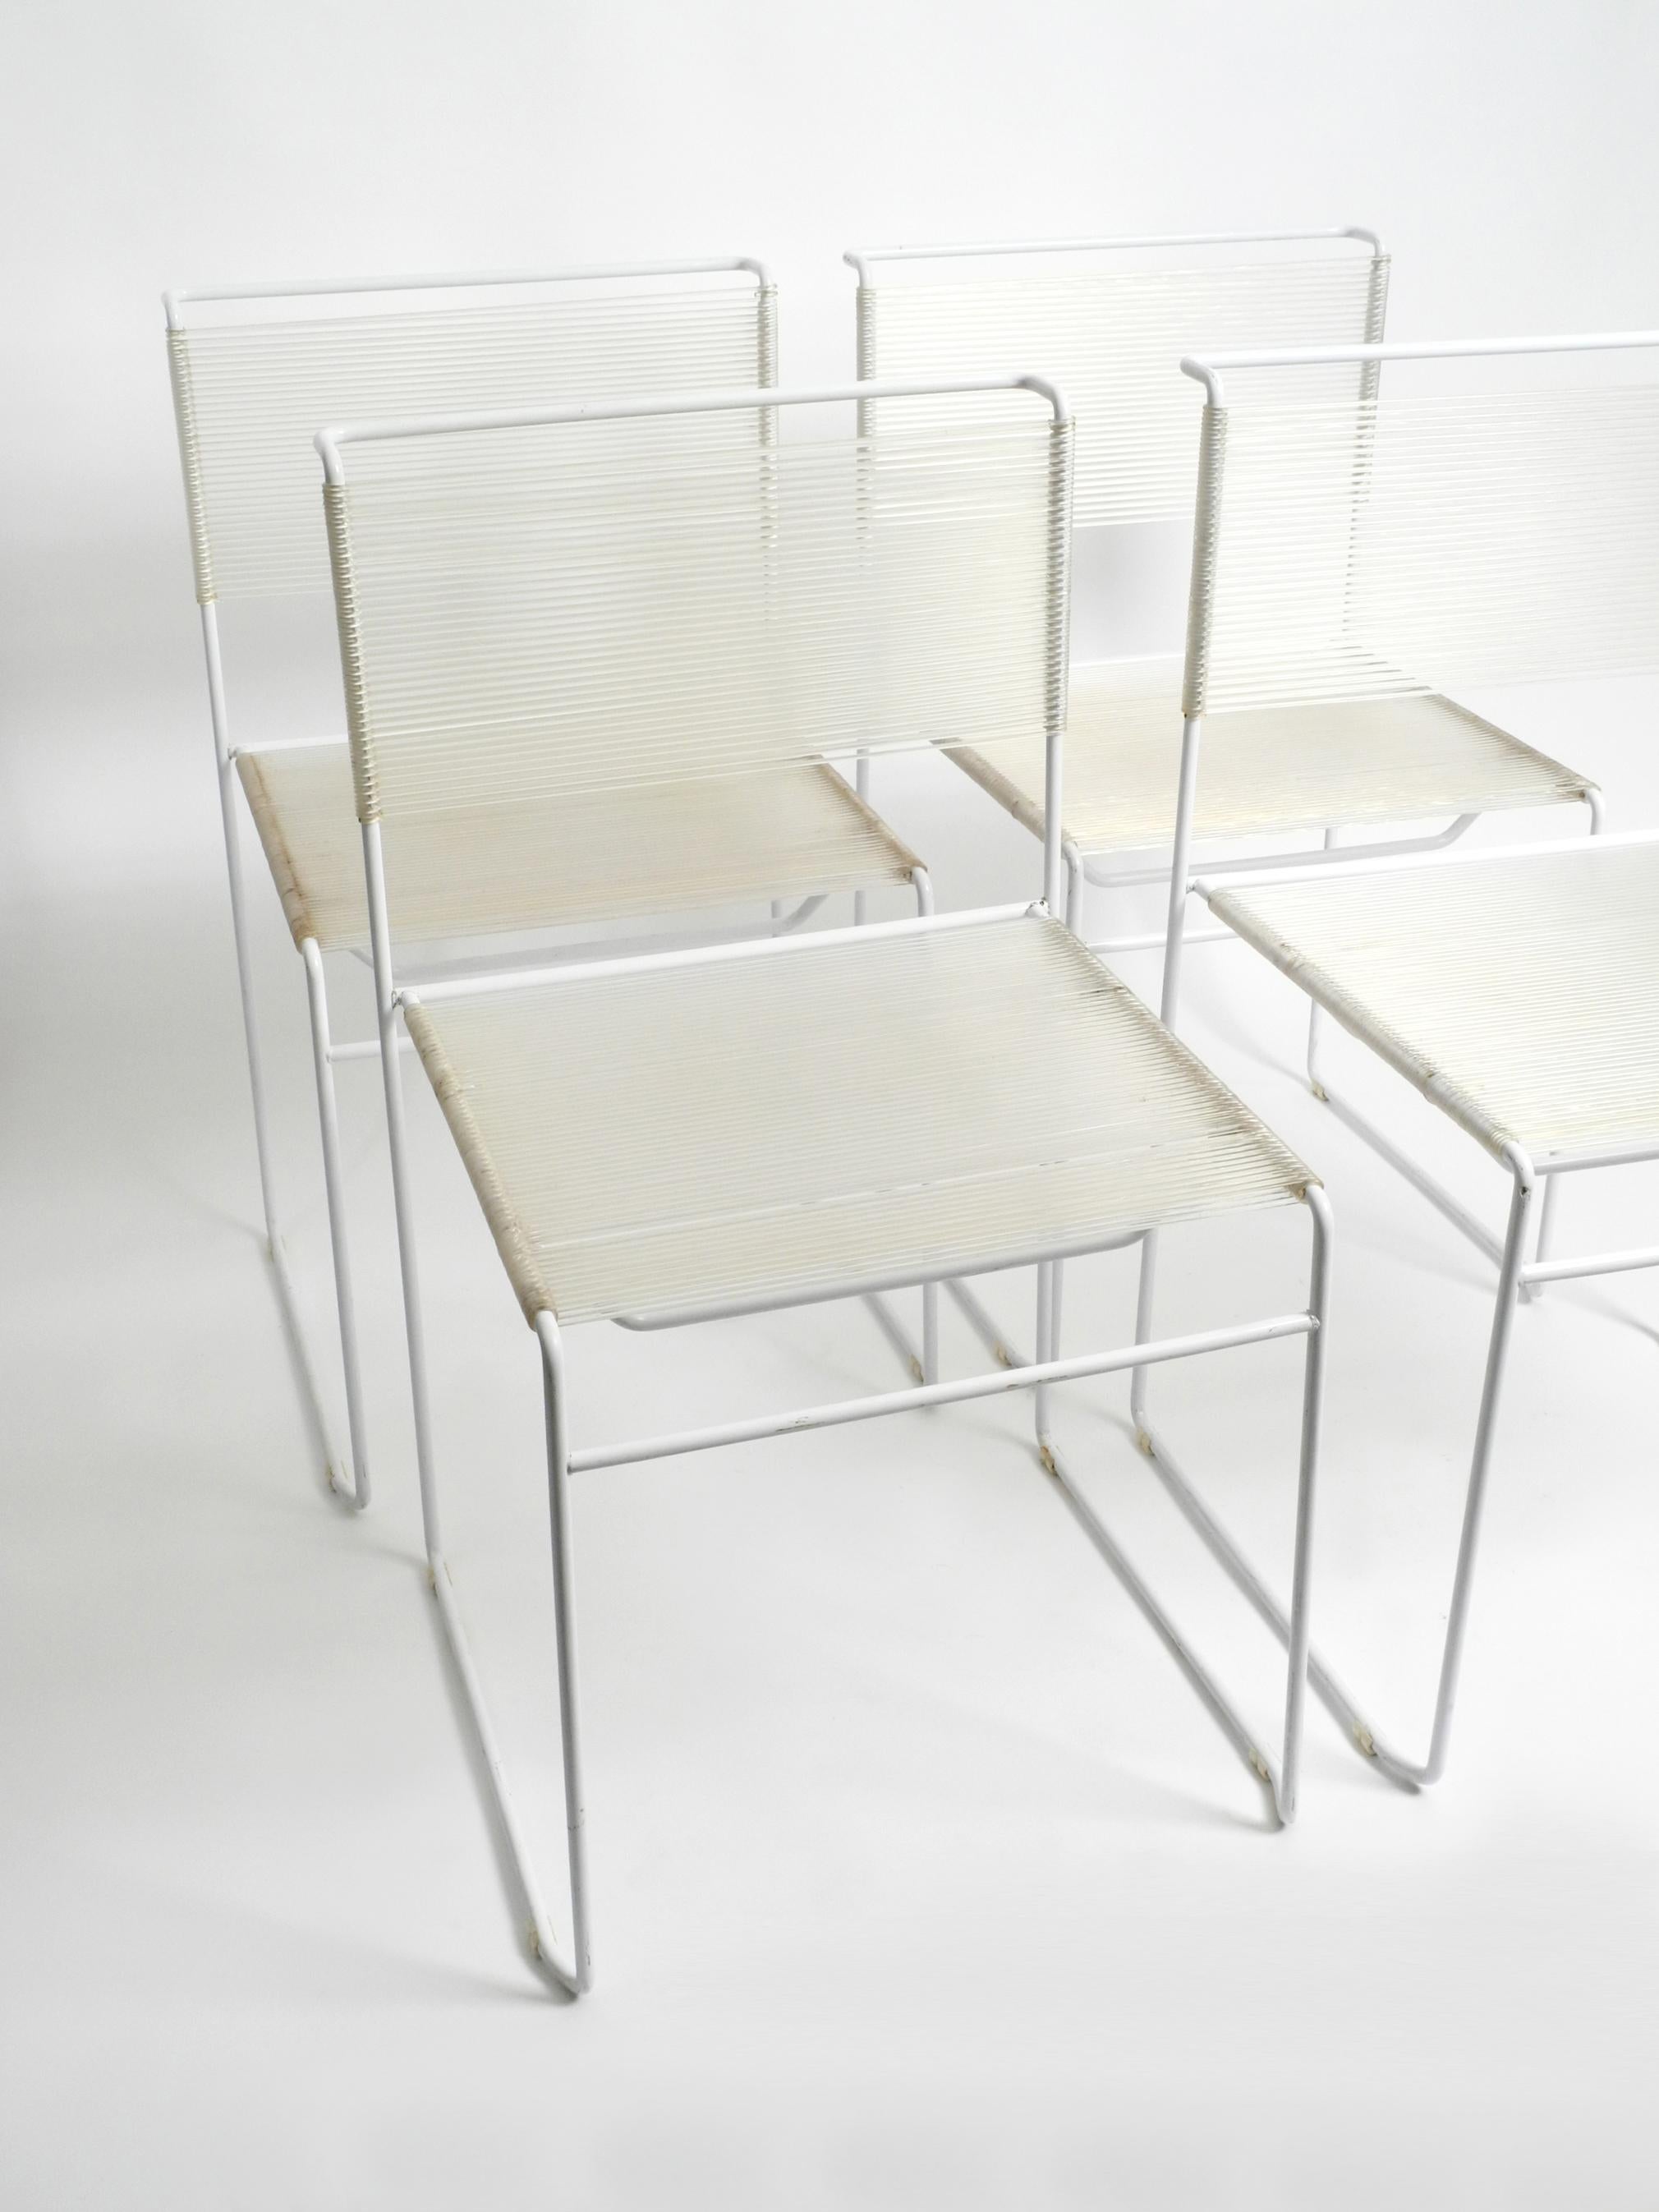 Set of four 1970s orignal Spagetti chairs in white by Giandomenico Belotti.
Manufacturer is Fly Line by CMP Padova. Made in Italy. 
Rare in white lacquered frame.
Gorgeous Minimalist Italian design from the Pop Art era.
Very good condition with